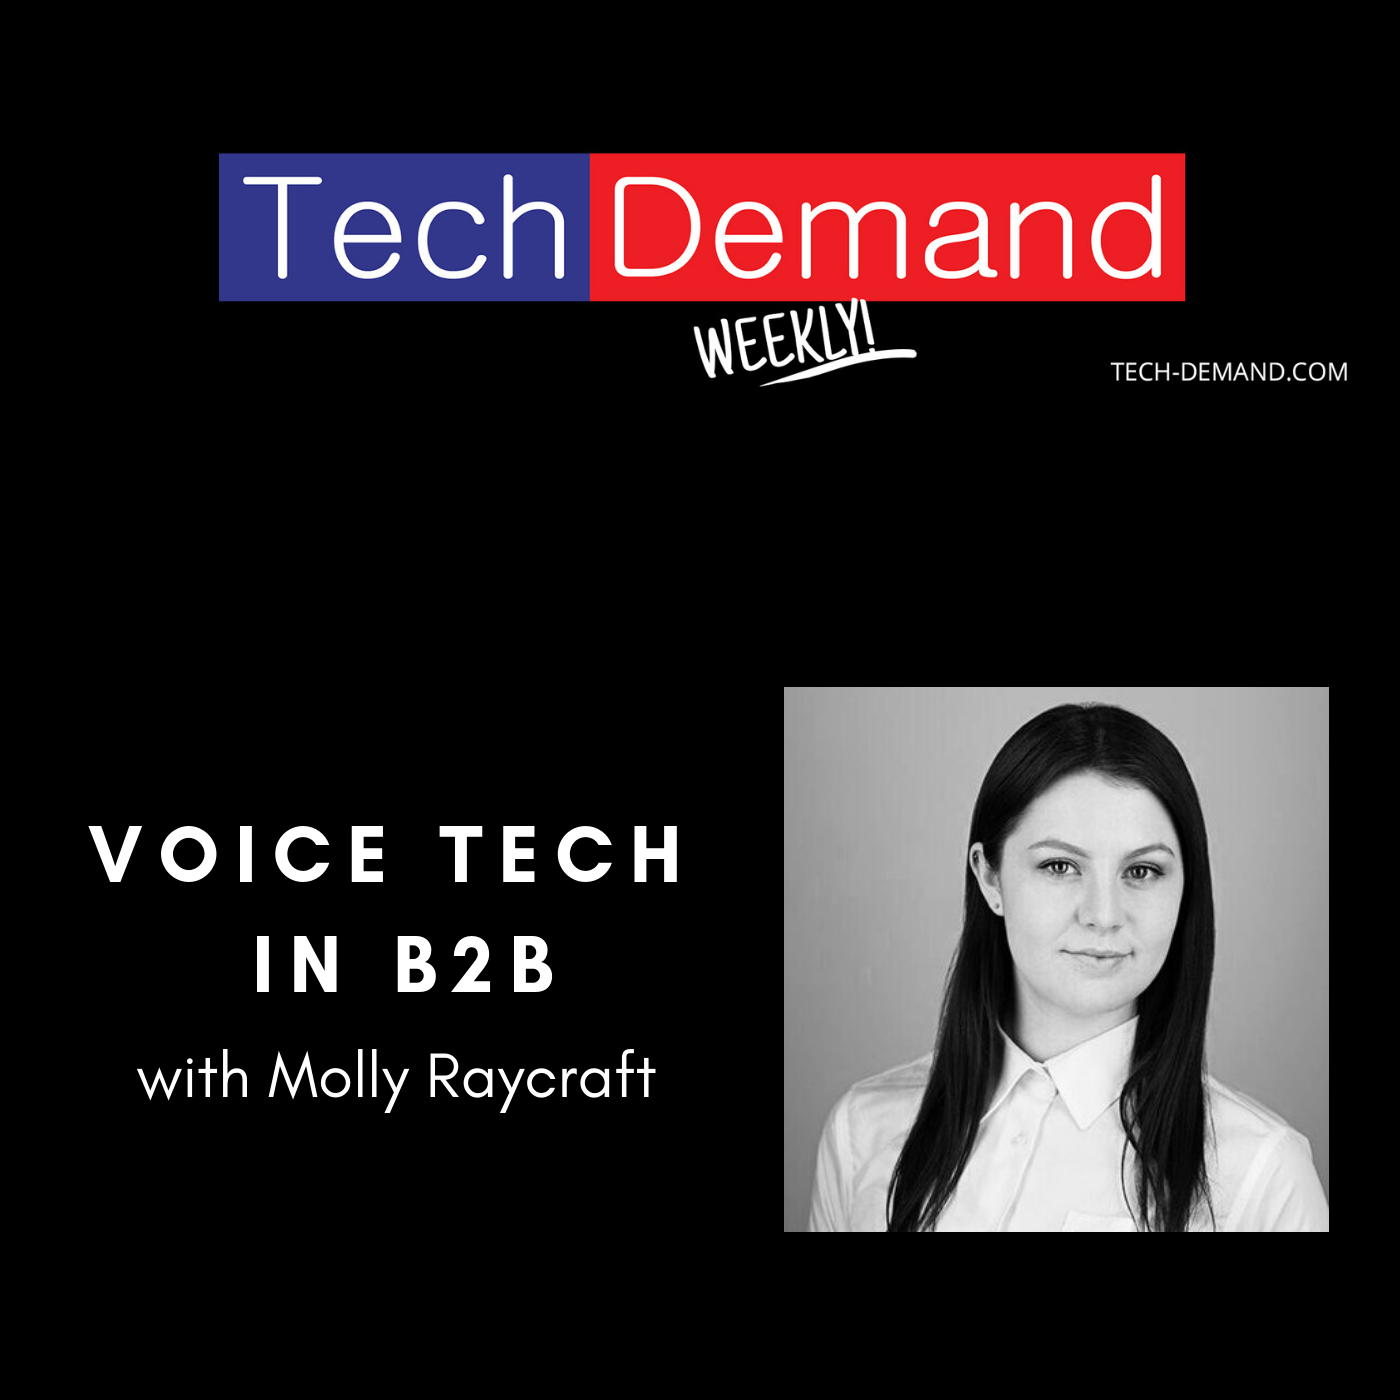 Tech Demand Weekly logo with name of episode to the left of a headshot picture of Molly Raycraft